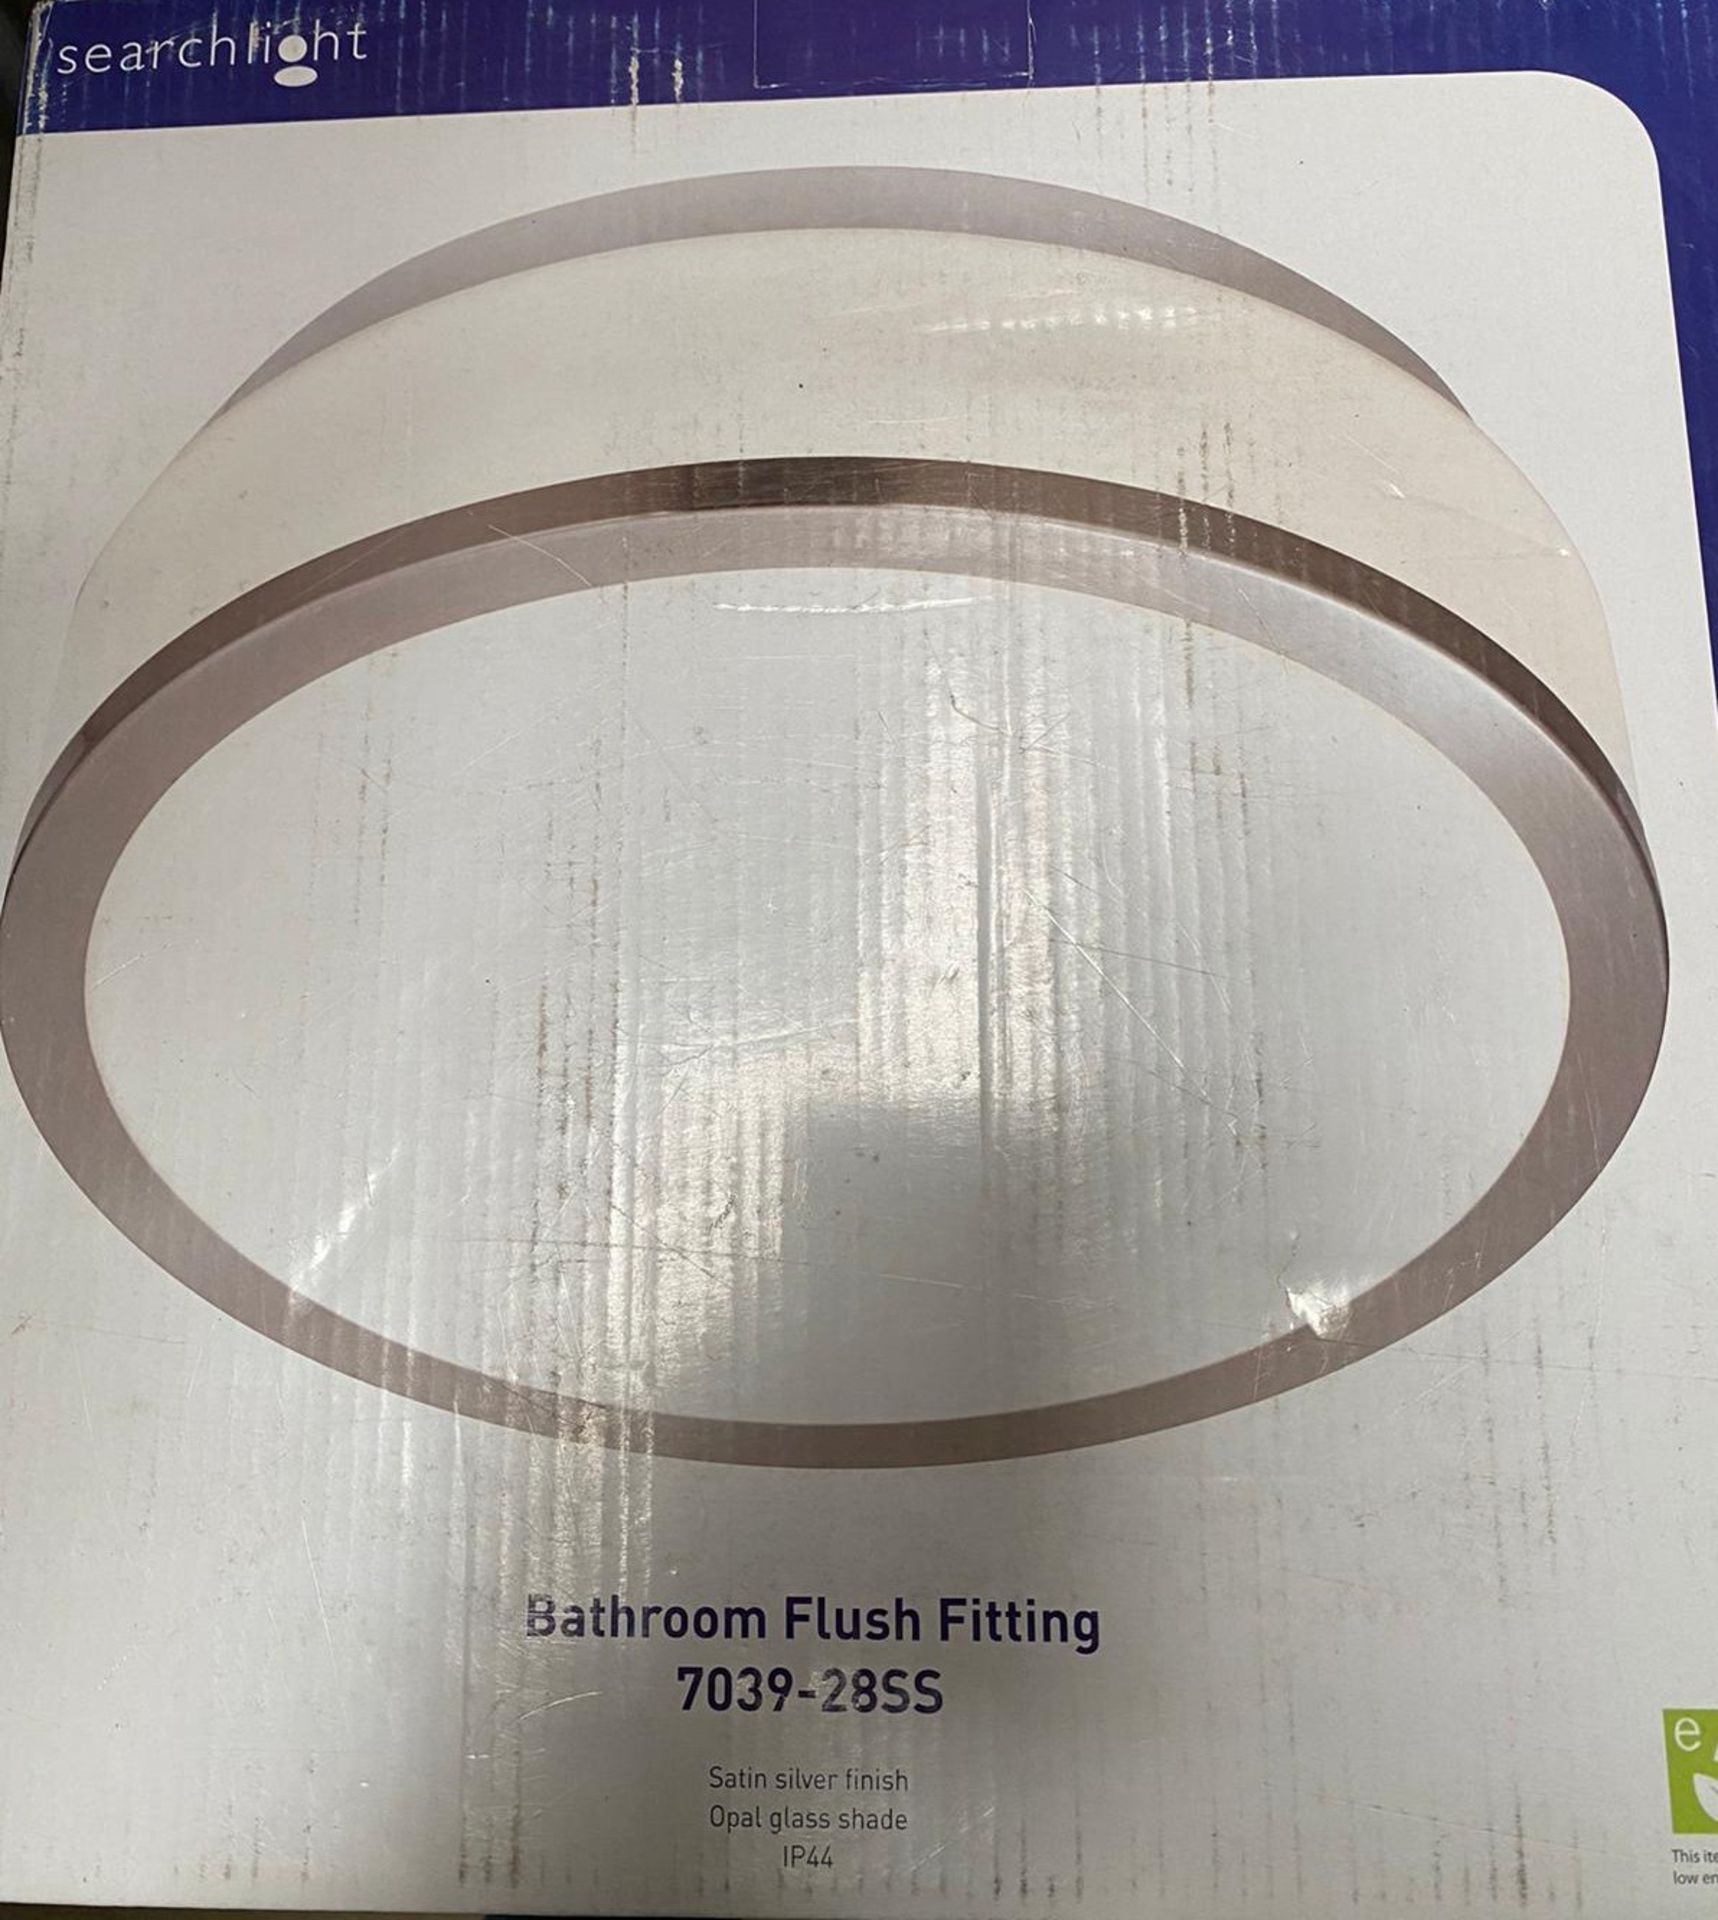 1 x Bathroom Flush fitting in a satin silver finish - Ref: 7039-28SS - New boxed - RRP: £60 (each) - Image 4 of 4